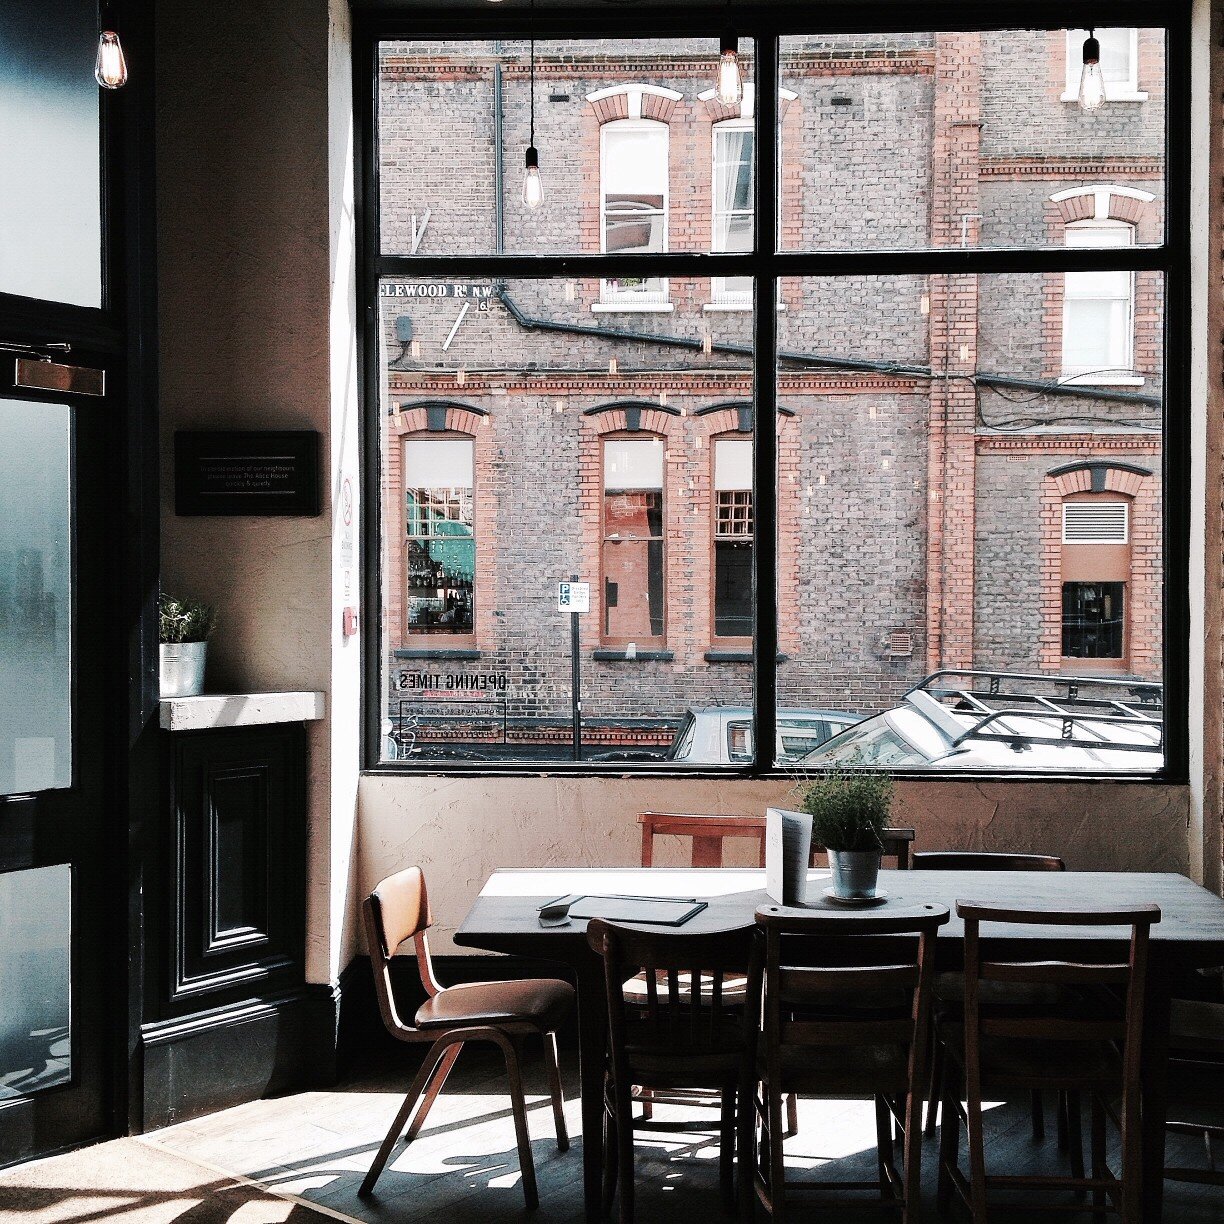 afternoon-light-at-the-alice-house-restaurant-in-west-hampstead-london_t20_ZnQ6oo.jpg